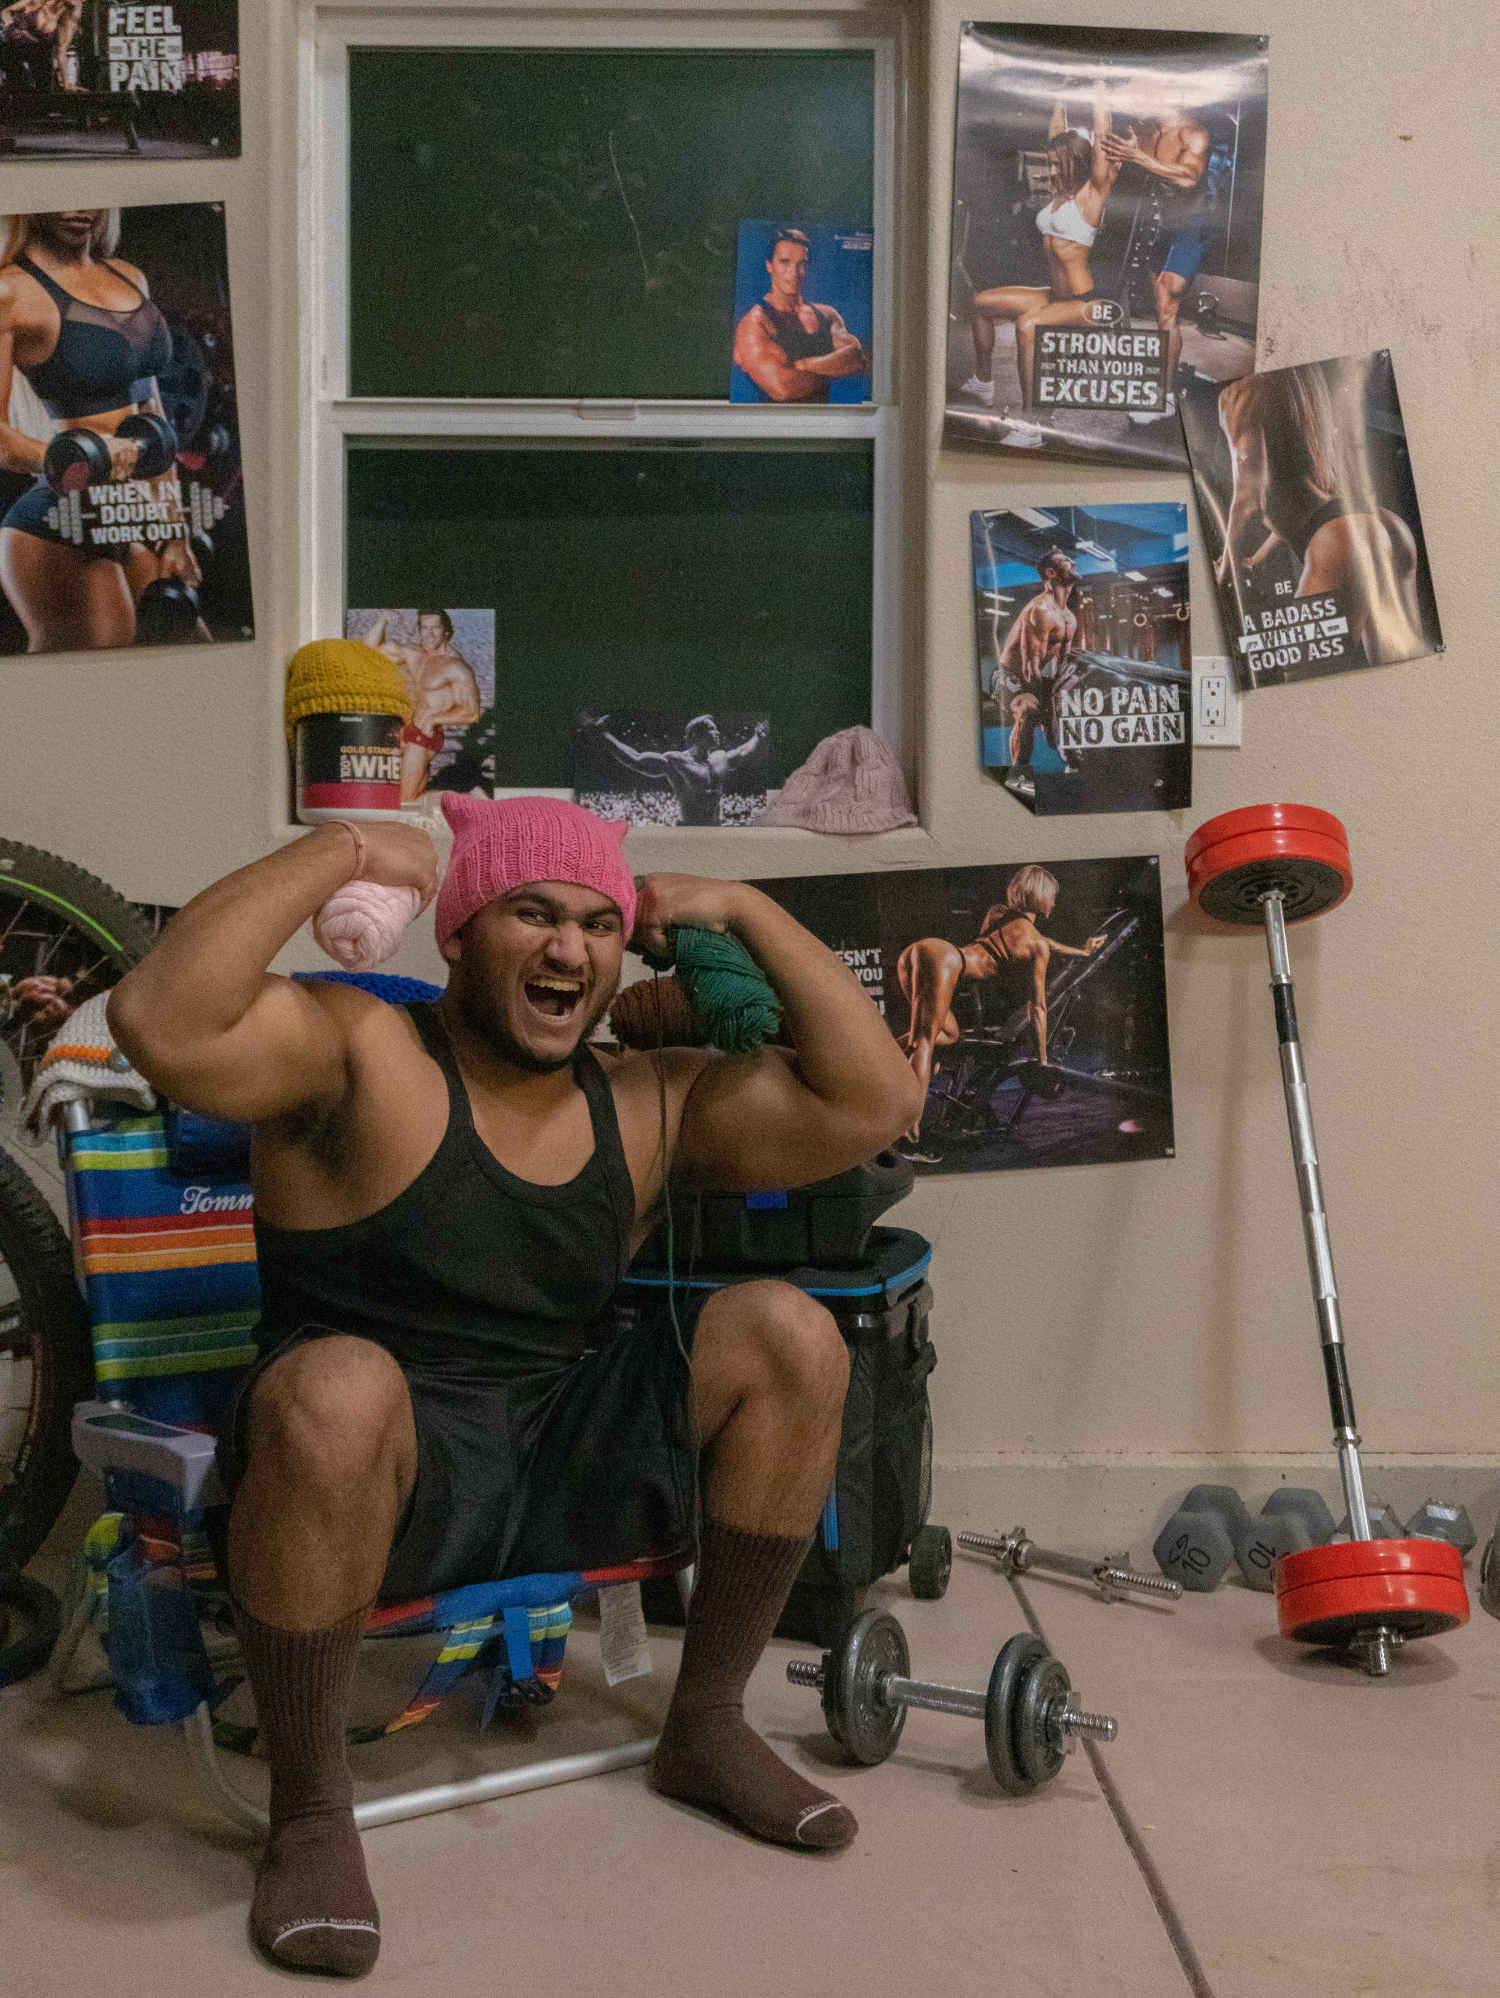 A man sitting on a chair in a room full of weights.